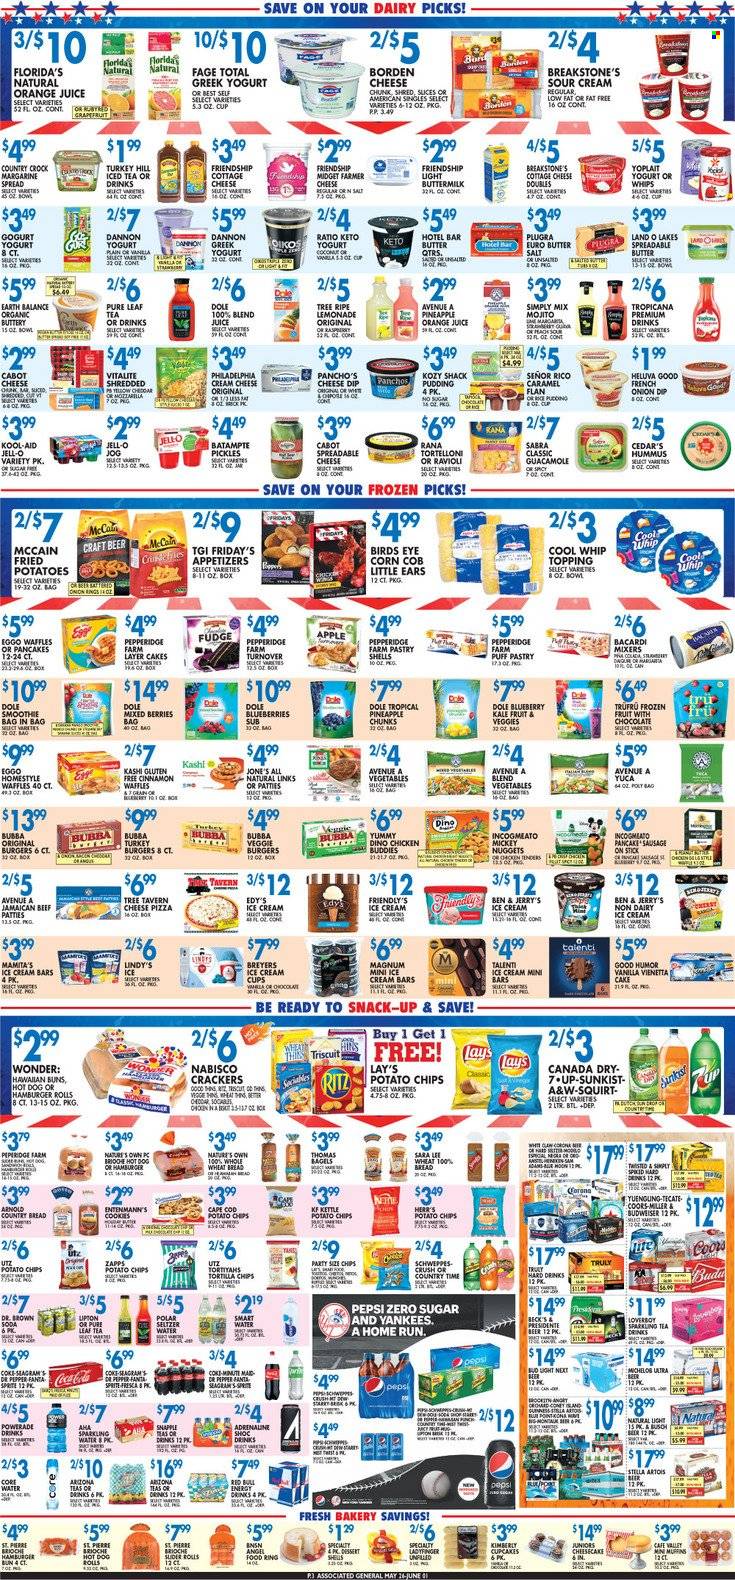 thumbnail - Associated Supermarkets Flyer - 05/26/2023 - 06/01/2023 - Sales products - bagels, wheat bread, hot dog rolls, cake, buns, burger buns, brioche, Sara Lee, cupcake, waffles, dessert shells, dessert, corn, kale, Dole, grapefruits, pineapple, ravioli, pizza, onion rings, nuggets, Bird's Eye, veggie burger, Rana, snack, sausage, guacamole, cottage cheese, farmer cheese, Philadelphia, cheese, Président, greek yoghurt, Oikos, Yoplait, Dannon, rice pudding, buttermilk, eggs, margarine, spreadable butter, Cool Whip, sour cream, puff pastry, ice cream, ice cream bars, Mickey Mouse, Ben & Jerry's, Talenti Gelato, Friendly's Ice Cream, McCain, cookies, fudge, crackers, Florida's Natural, RITZ, Nabisco, tortilla chips, potato chips, Lay’s, topping, Jell-O, pickles, cinnamon, Canada Dry, Coca-Cola, lemonade, Schweppes, Sprite, Powerade, Pepsi, orange juice, juice, Fanta, energy drink, Lipton, ice tea, Dr. Pepper, soft drink, Red Bull, AriZona, Snapple, A&W, Country Time, fruit punch, Coke, smoothie, seltzer water, soda, Smartwater, water, powder drink, Pure Leaf, alcohol, Bacardi, TRULY, Busch, Stella Artois, Bud Light, Corona Extra, Beck's, chicken, turkey, Sure, bowl, Nature's Own, Budweiser, Coors, Yuengling. Page 3.